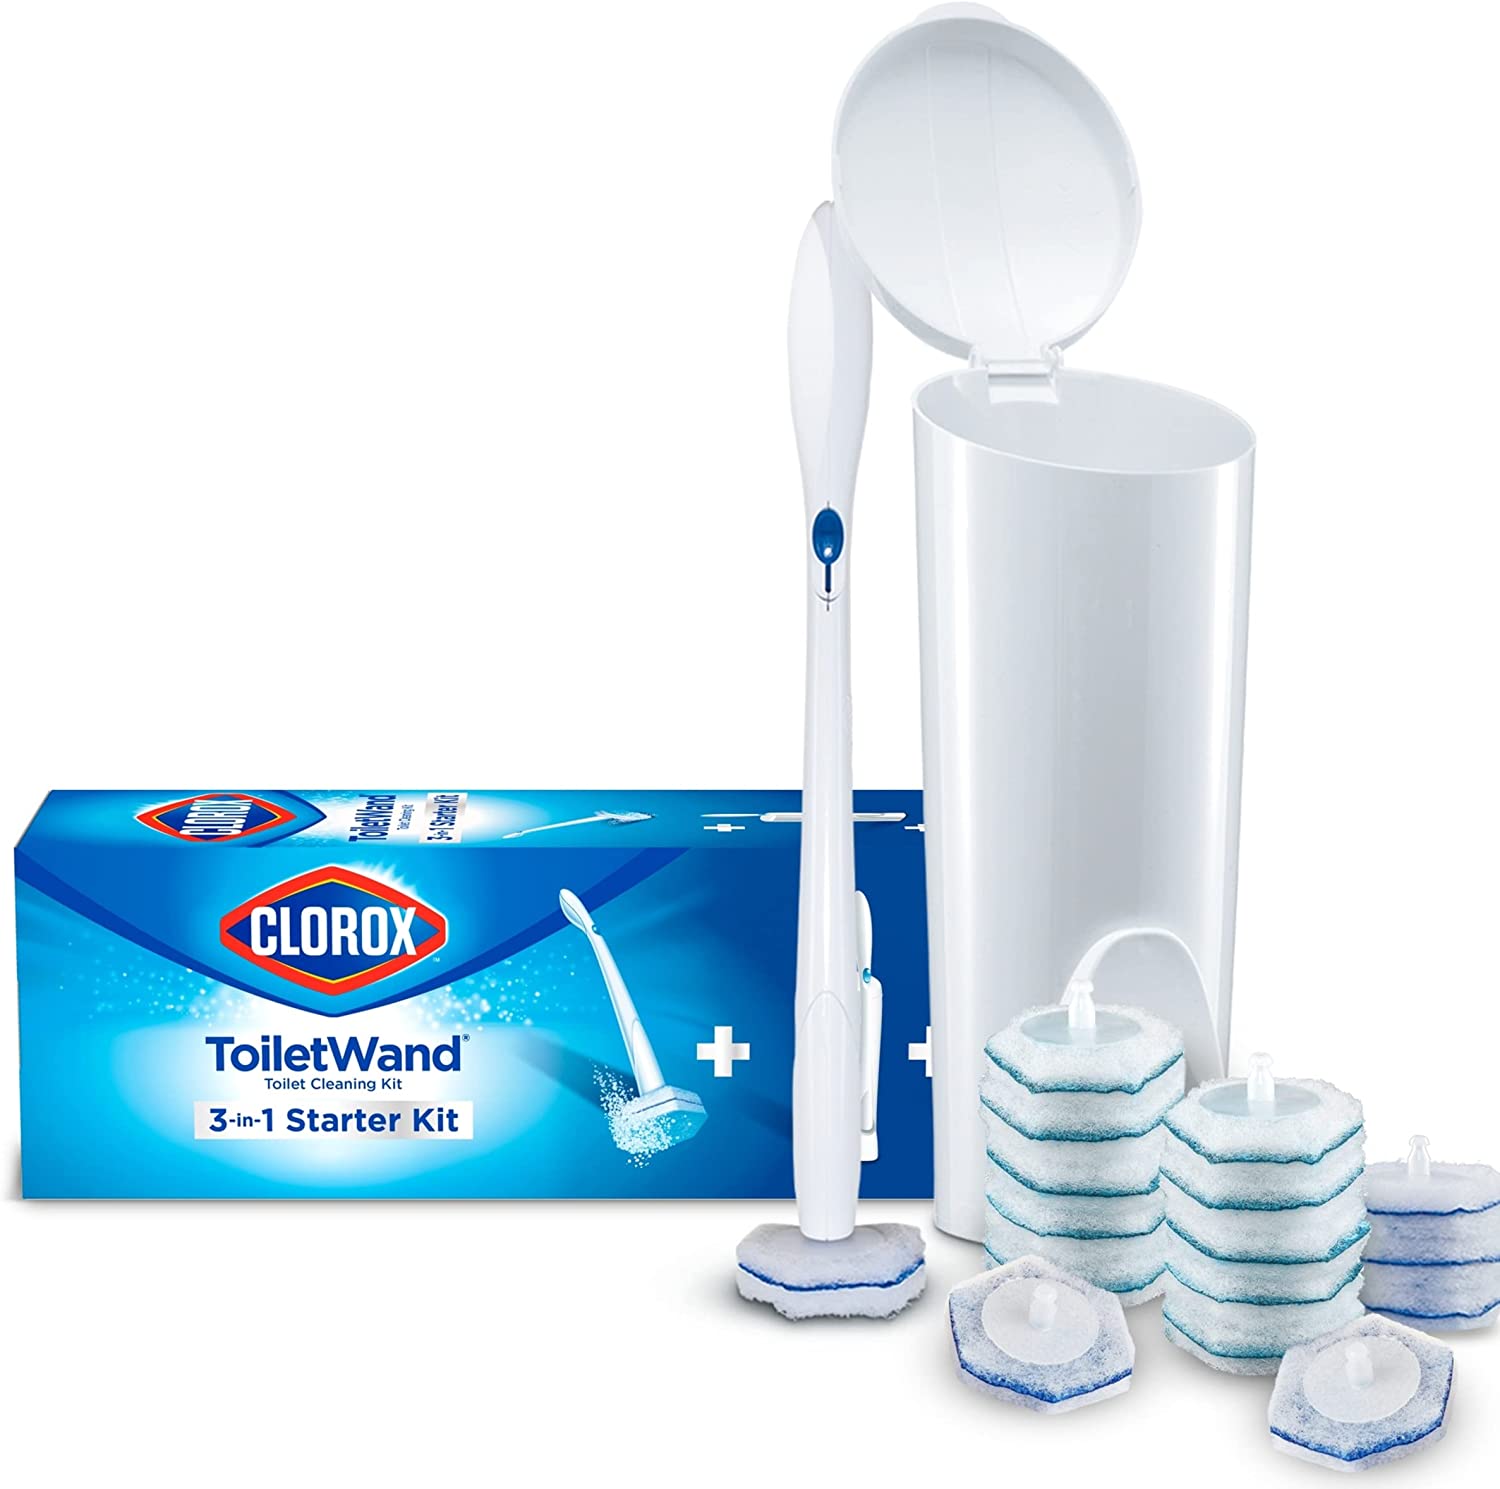 Clorox ToiletWand Disposable Sponges Cleaning Supplies Kit